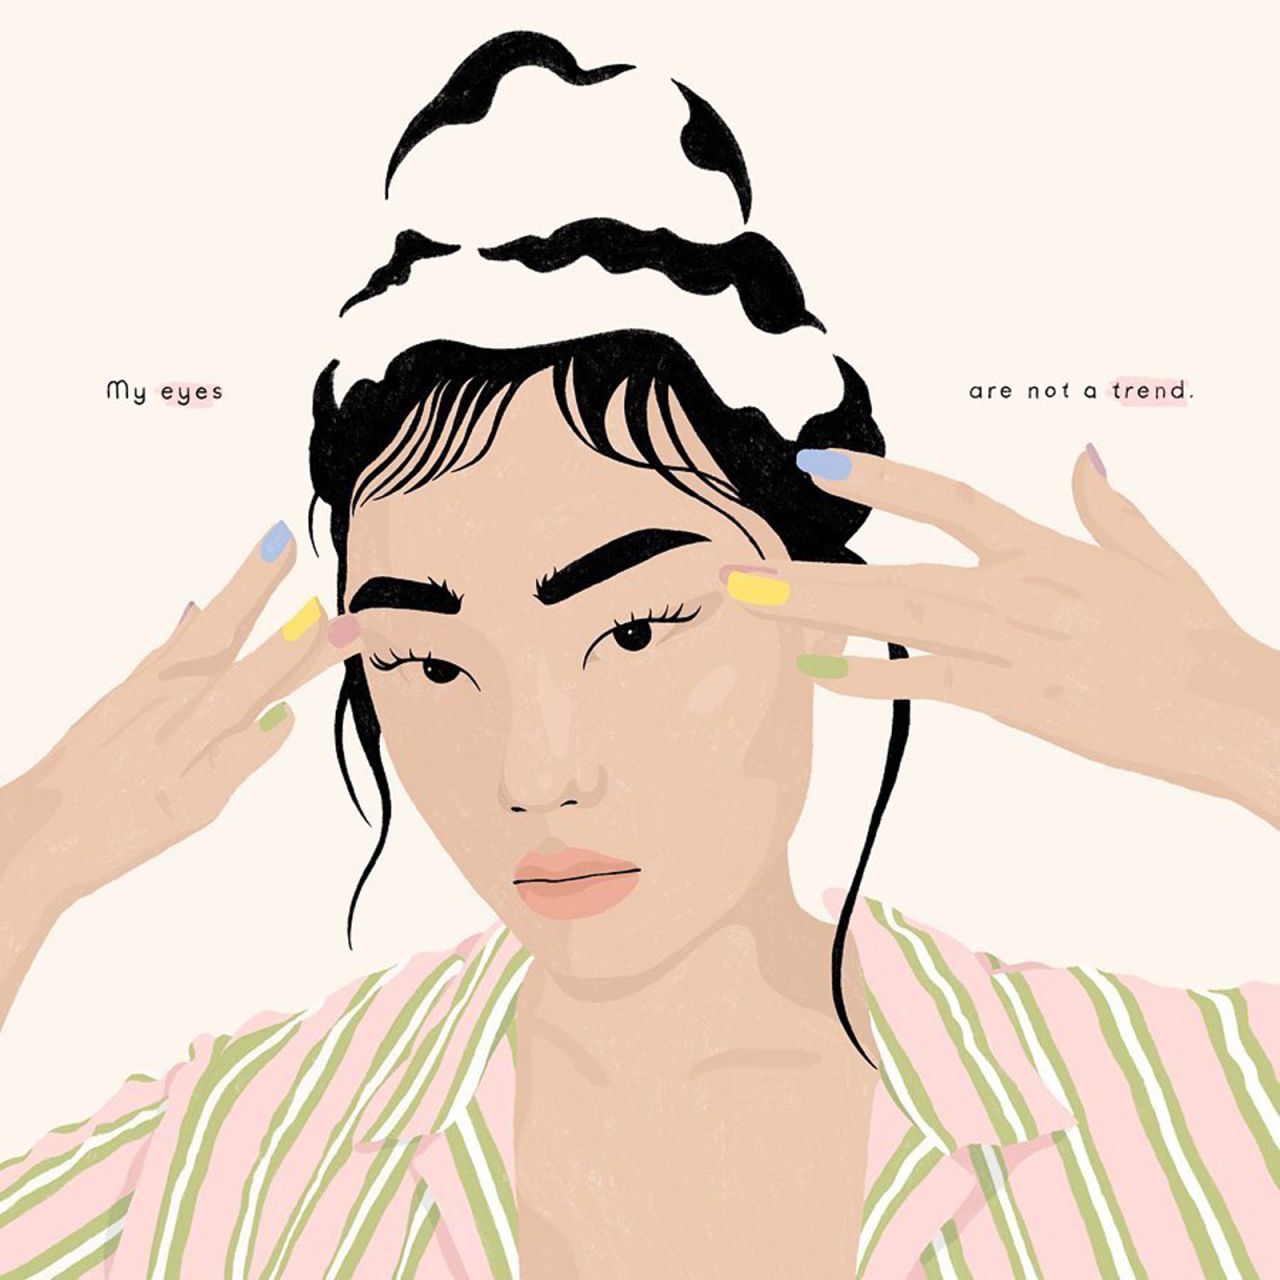 "My eyes are not a trend," by Chungi Yoo, an illustrator based in Frankfurt, Germany. 